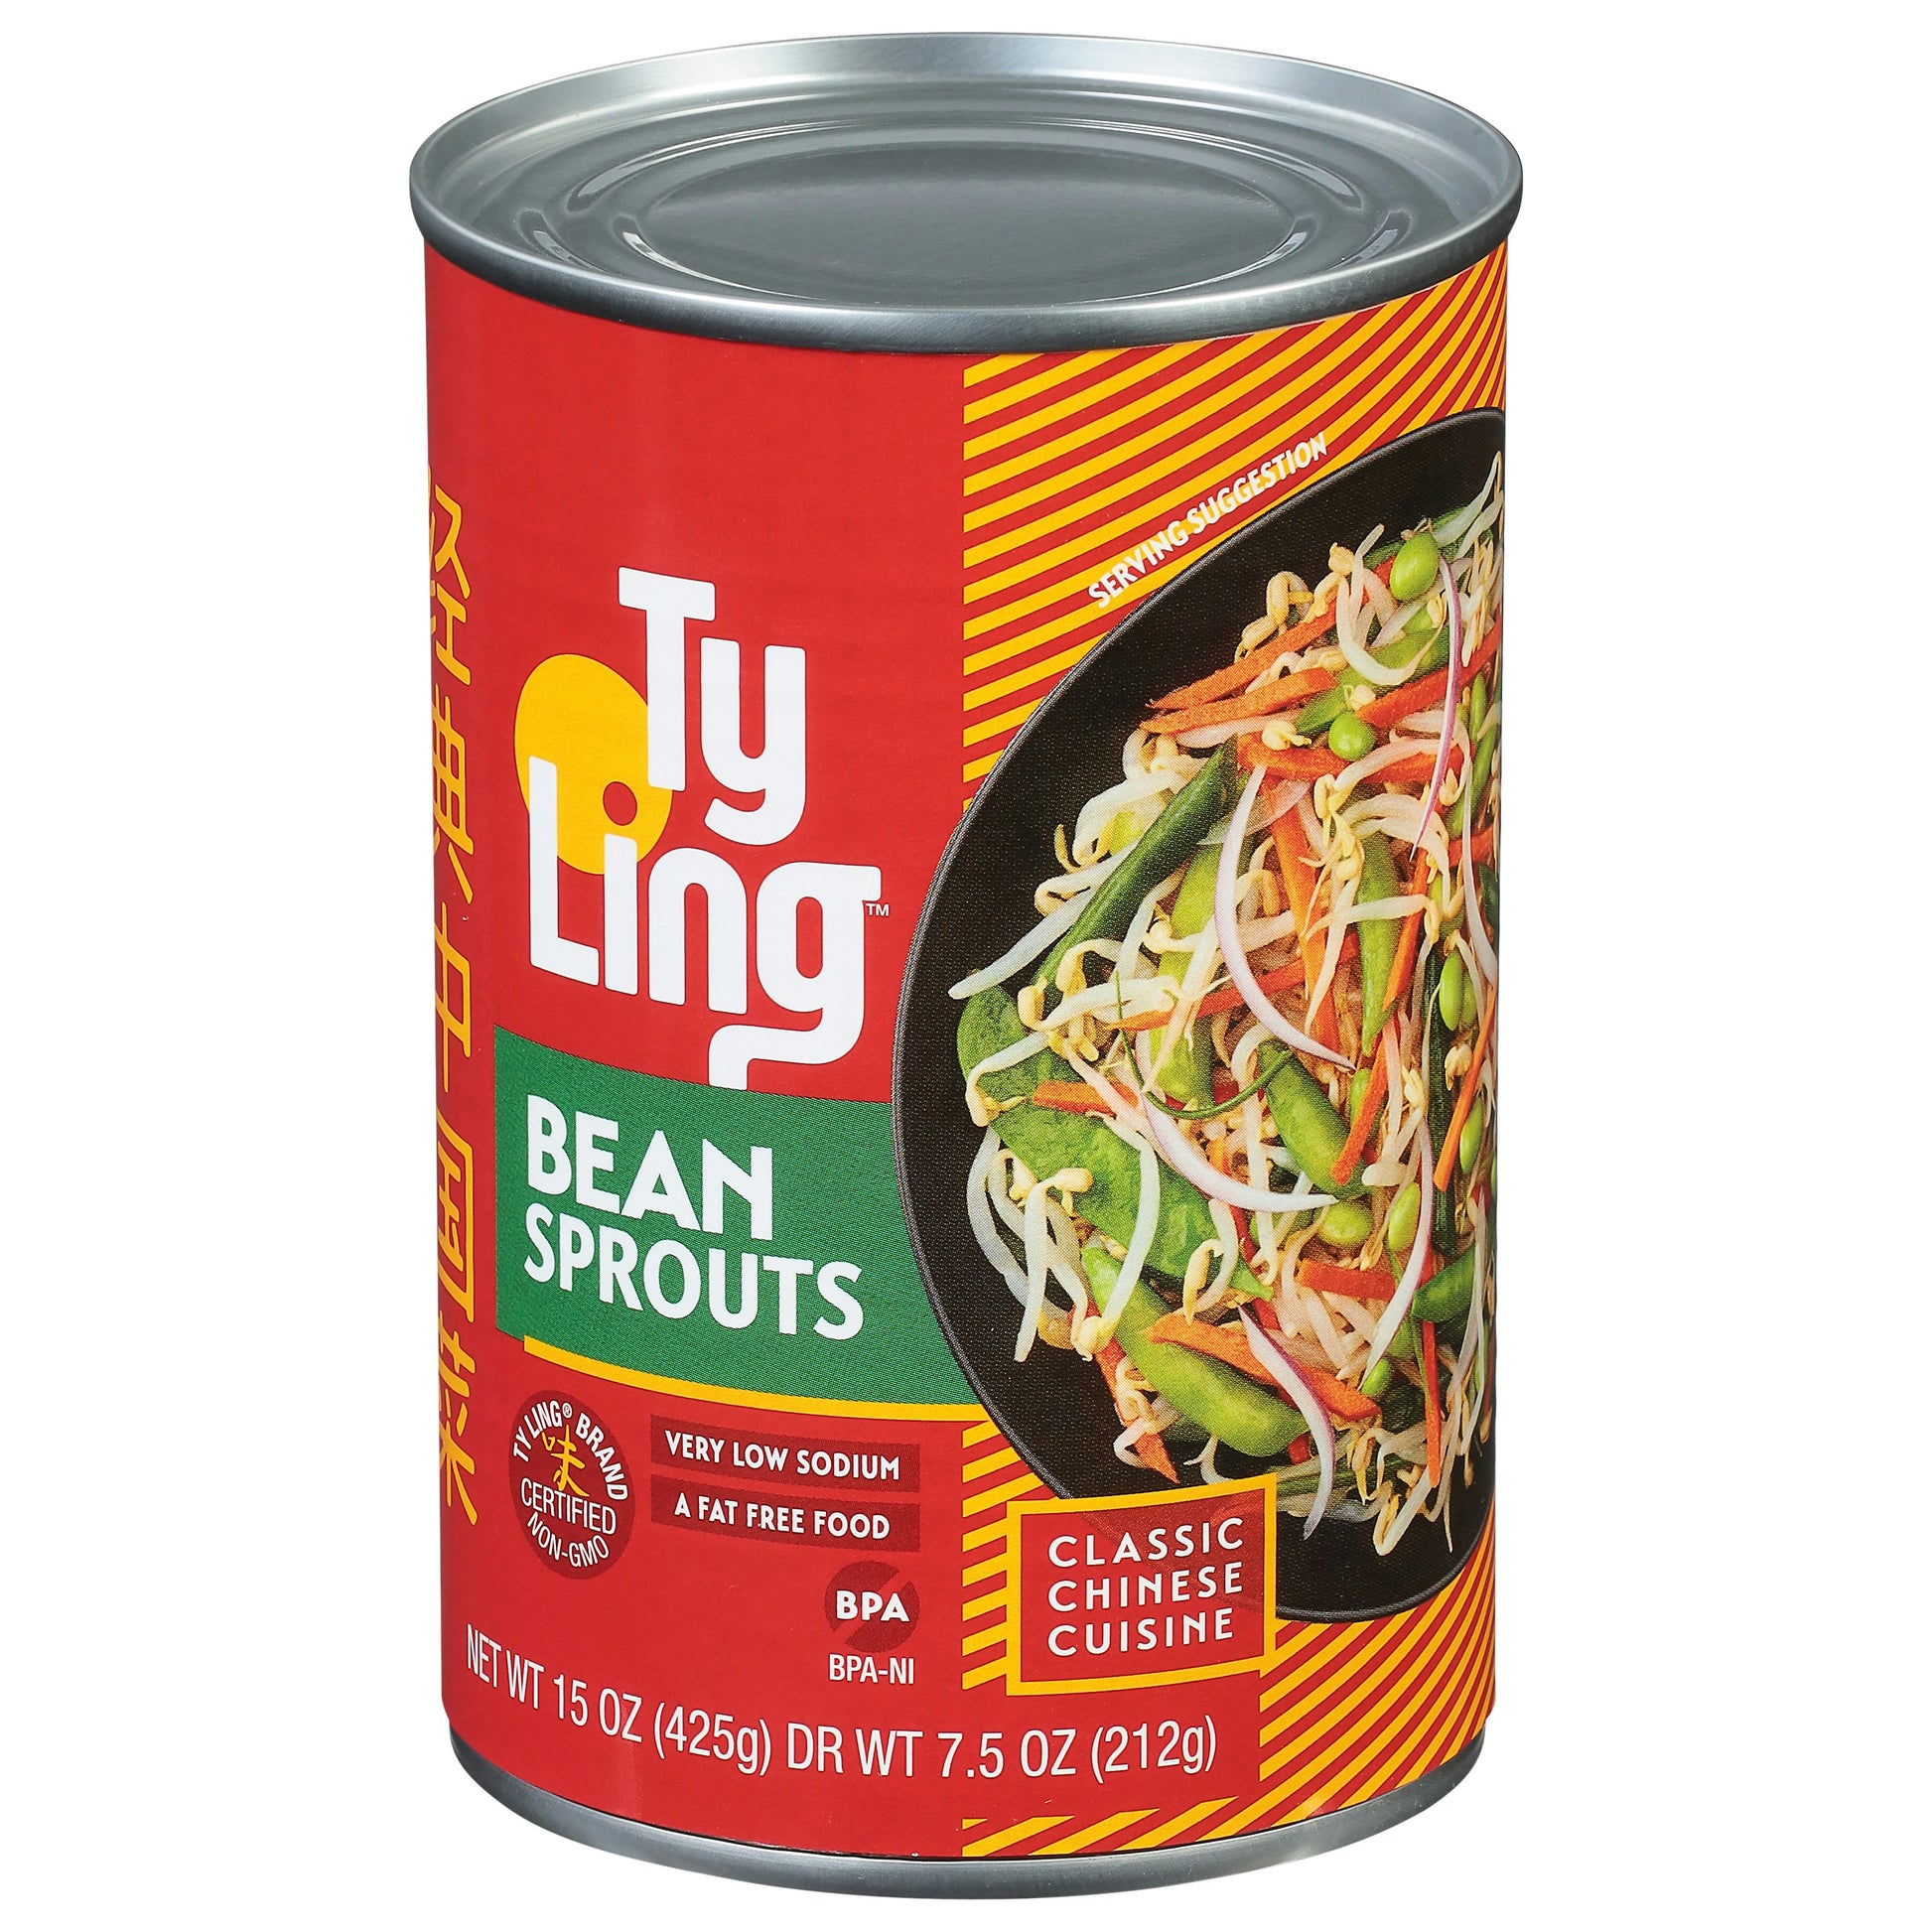 Ty Ling Stir Fry Bean Sprout 15 Oz Pack of 12